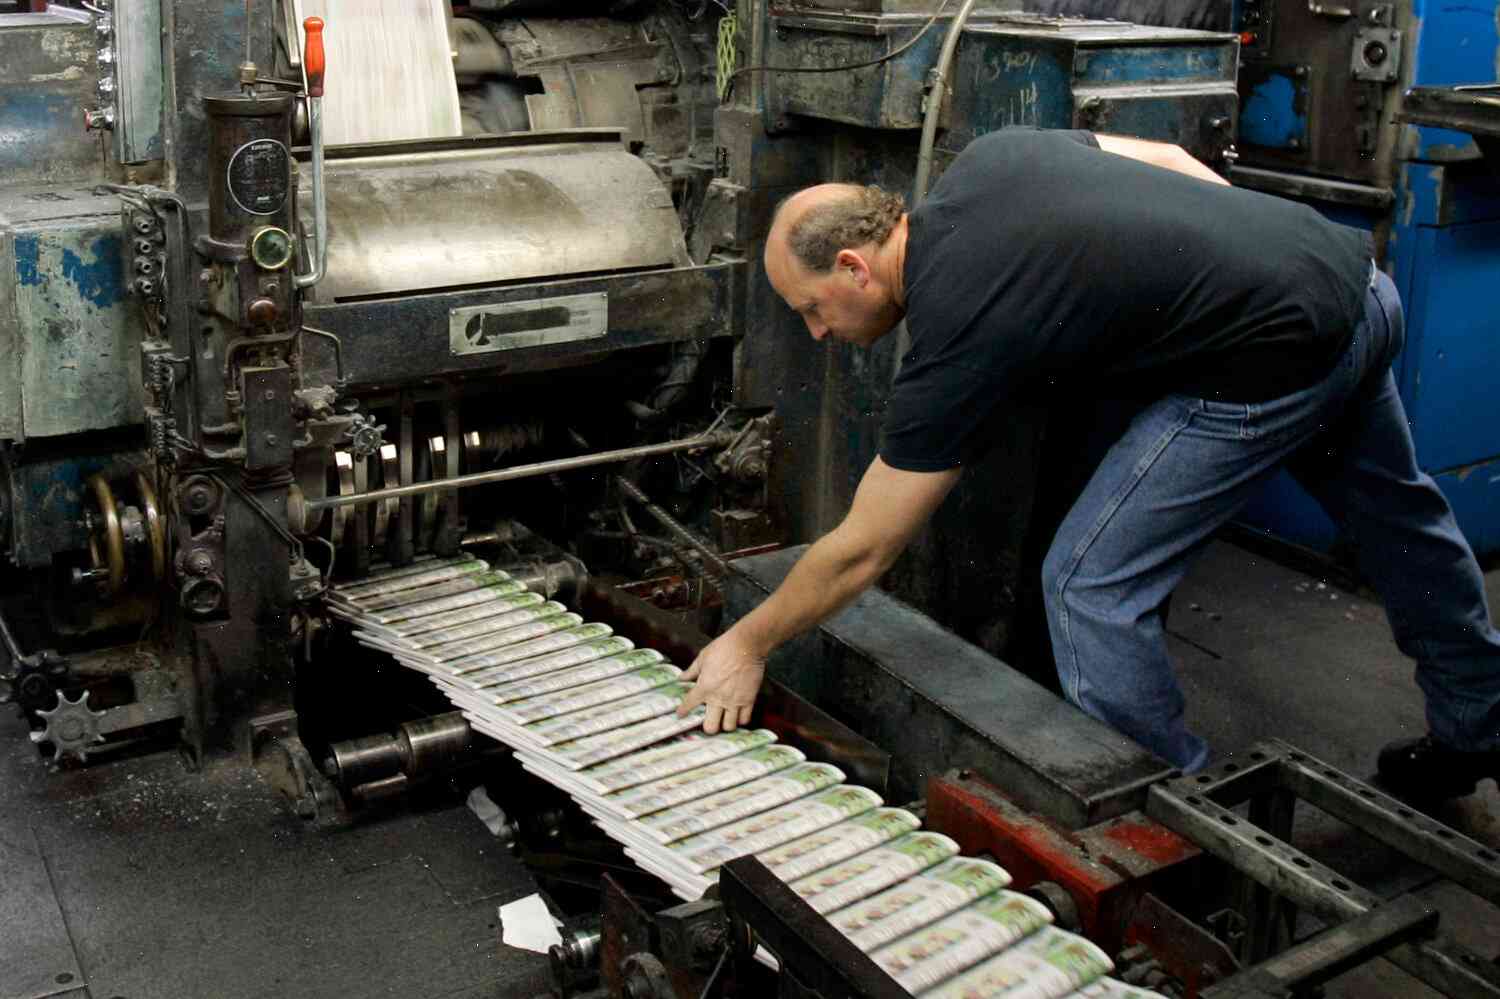 Alliston-based Lee Newspapers files for Chapter 11 bankruptcy protection